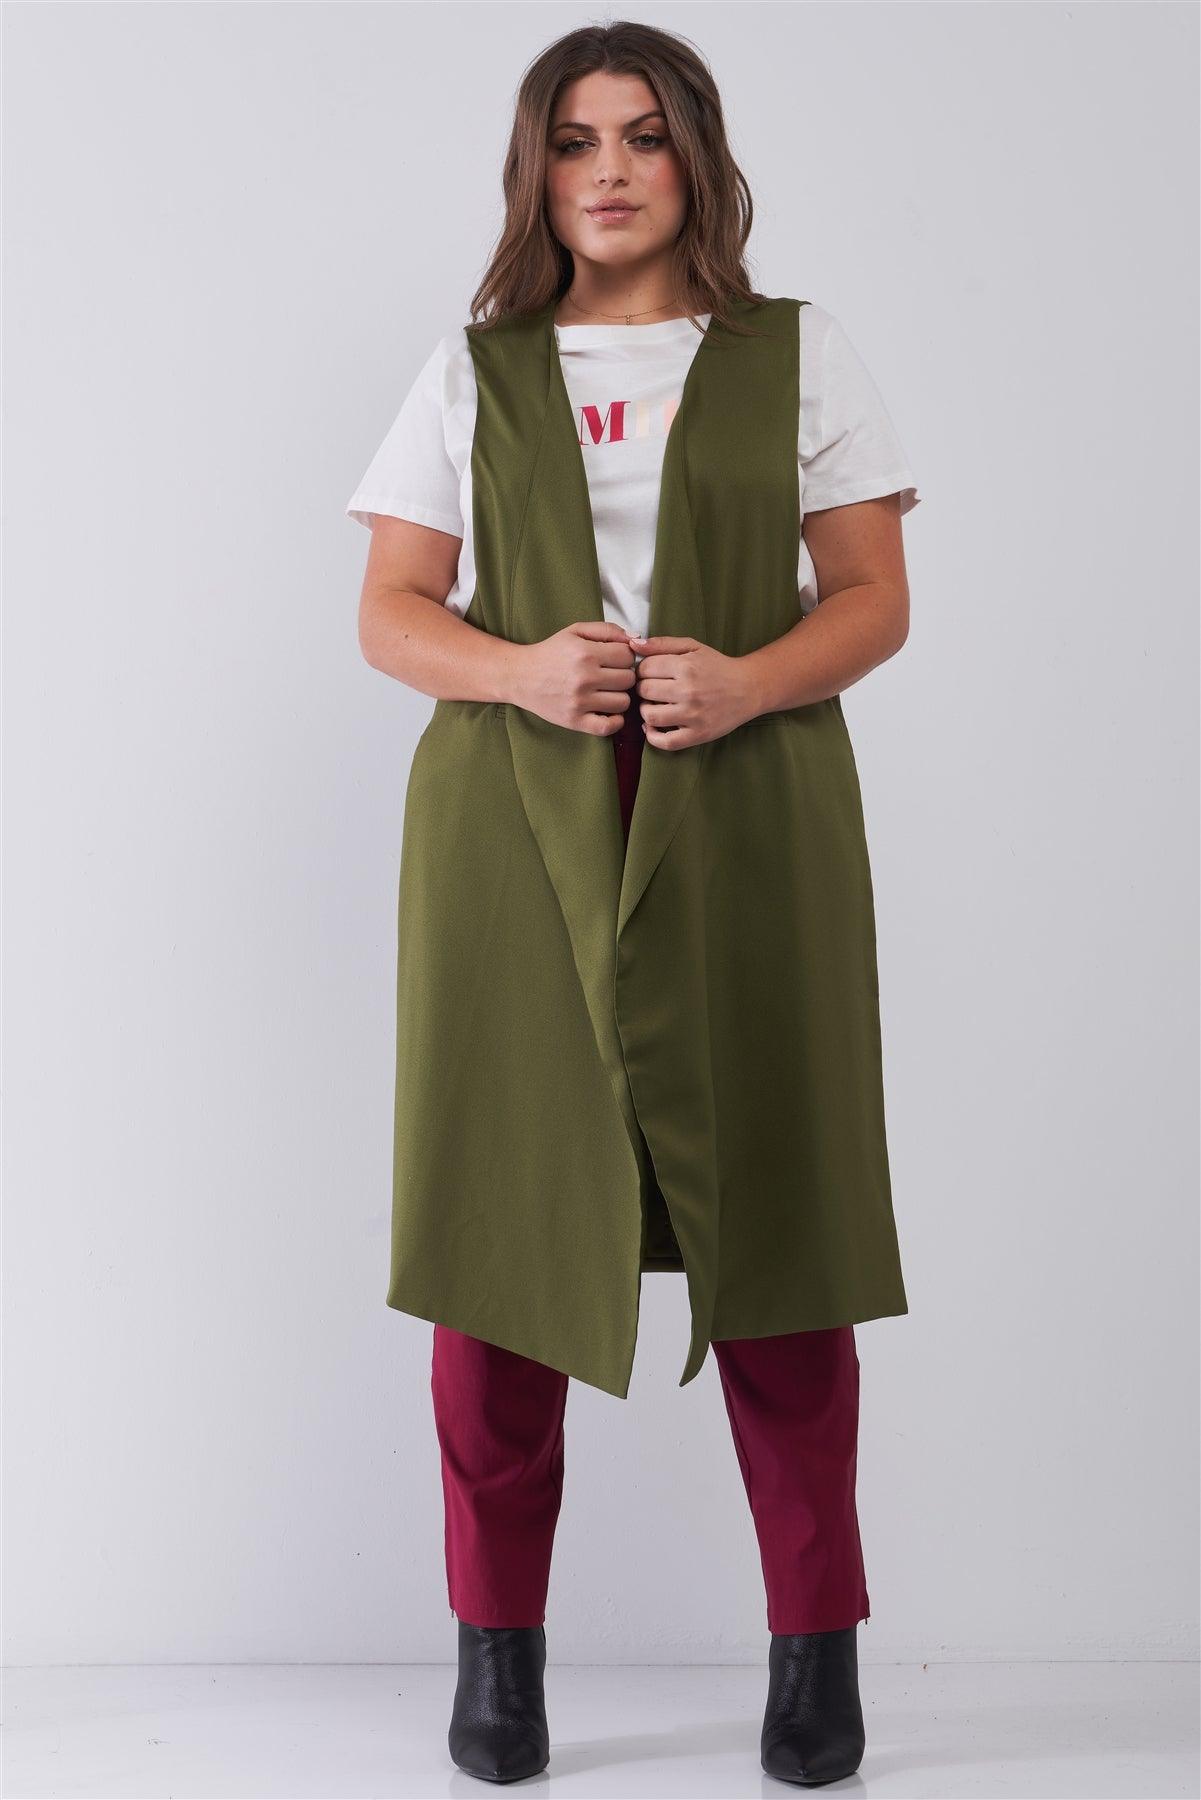 Junior Plus Olive Open Front And Side Sleeveless Long Vest /6 Pieces